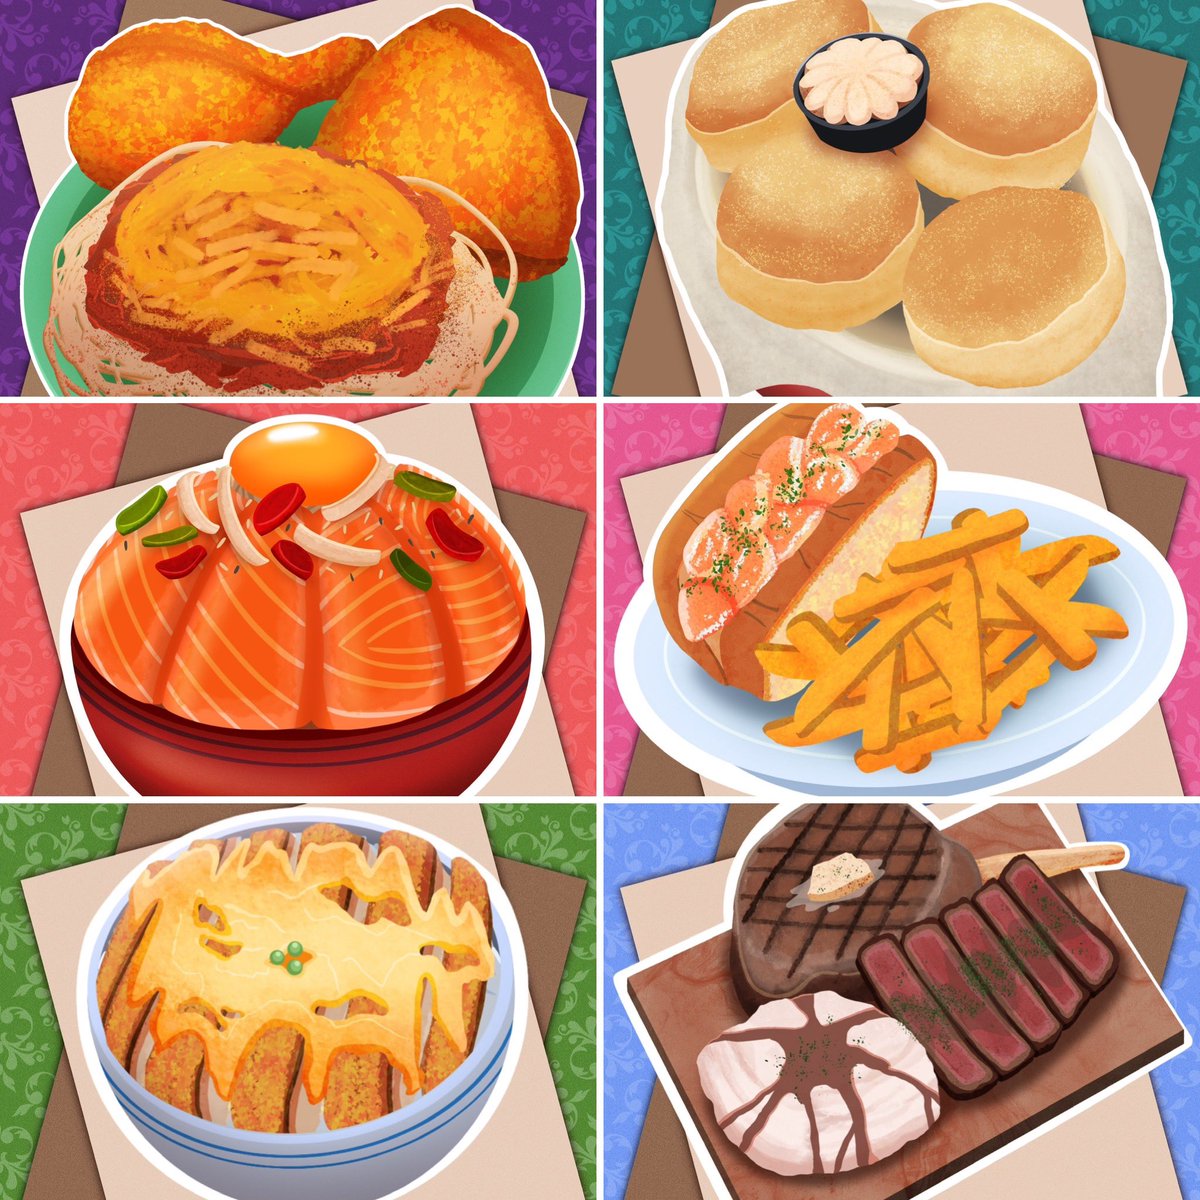 “Food Study - Part 1/?”
.
I always enjoy drawing my favorite foods while I put on a cooking documentary in the background! It’s a nice, relaxing change of pace from putting out character art! 
.
#TheLawby #FoodStudy #FavoriteFood #FoodArt #DigitalArt #Illustration #Procreate